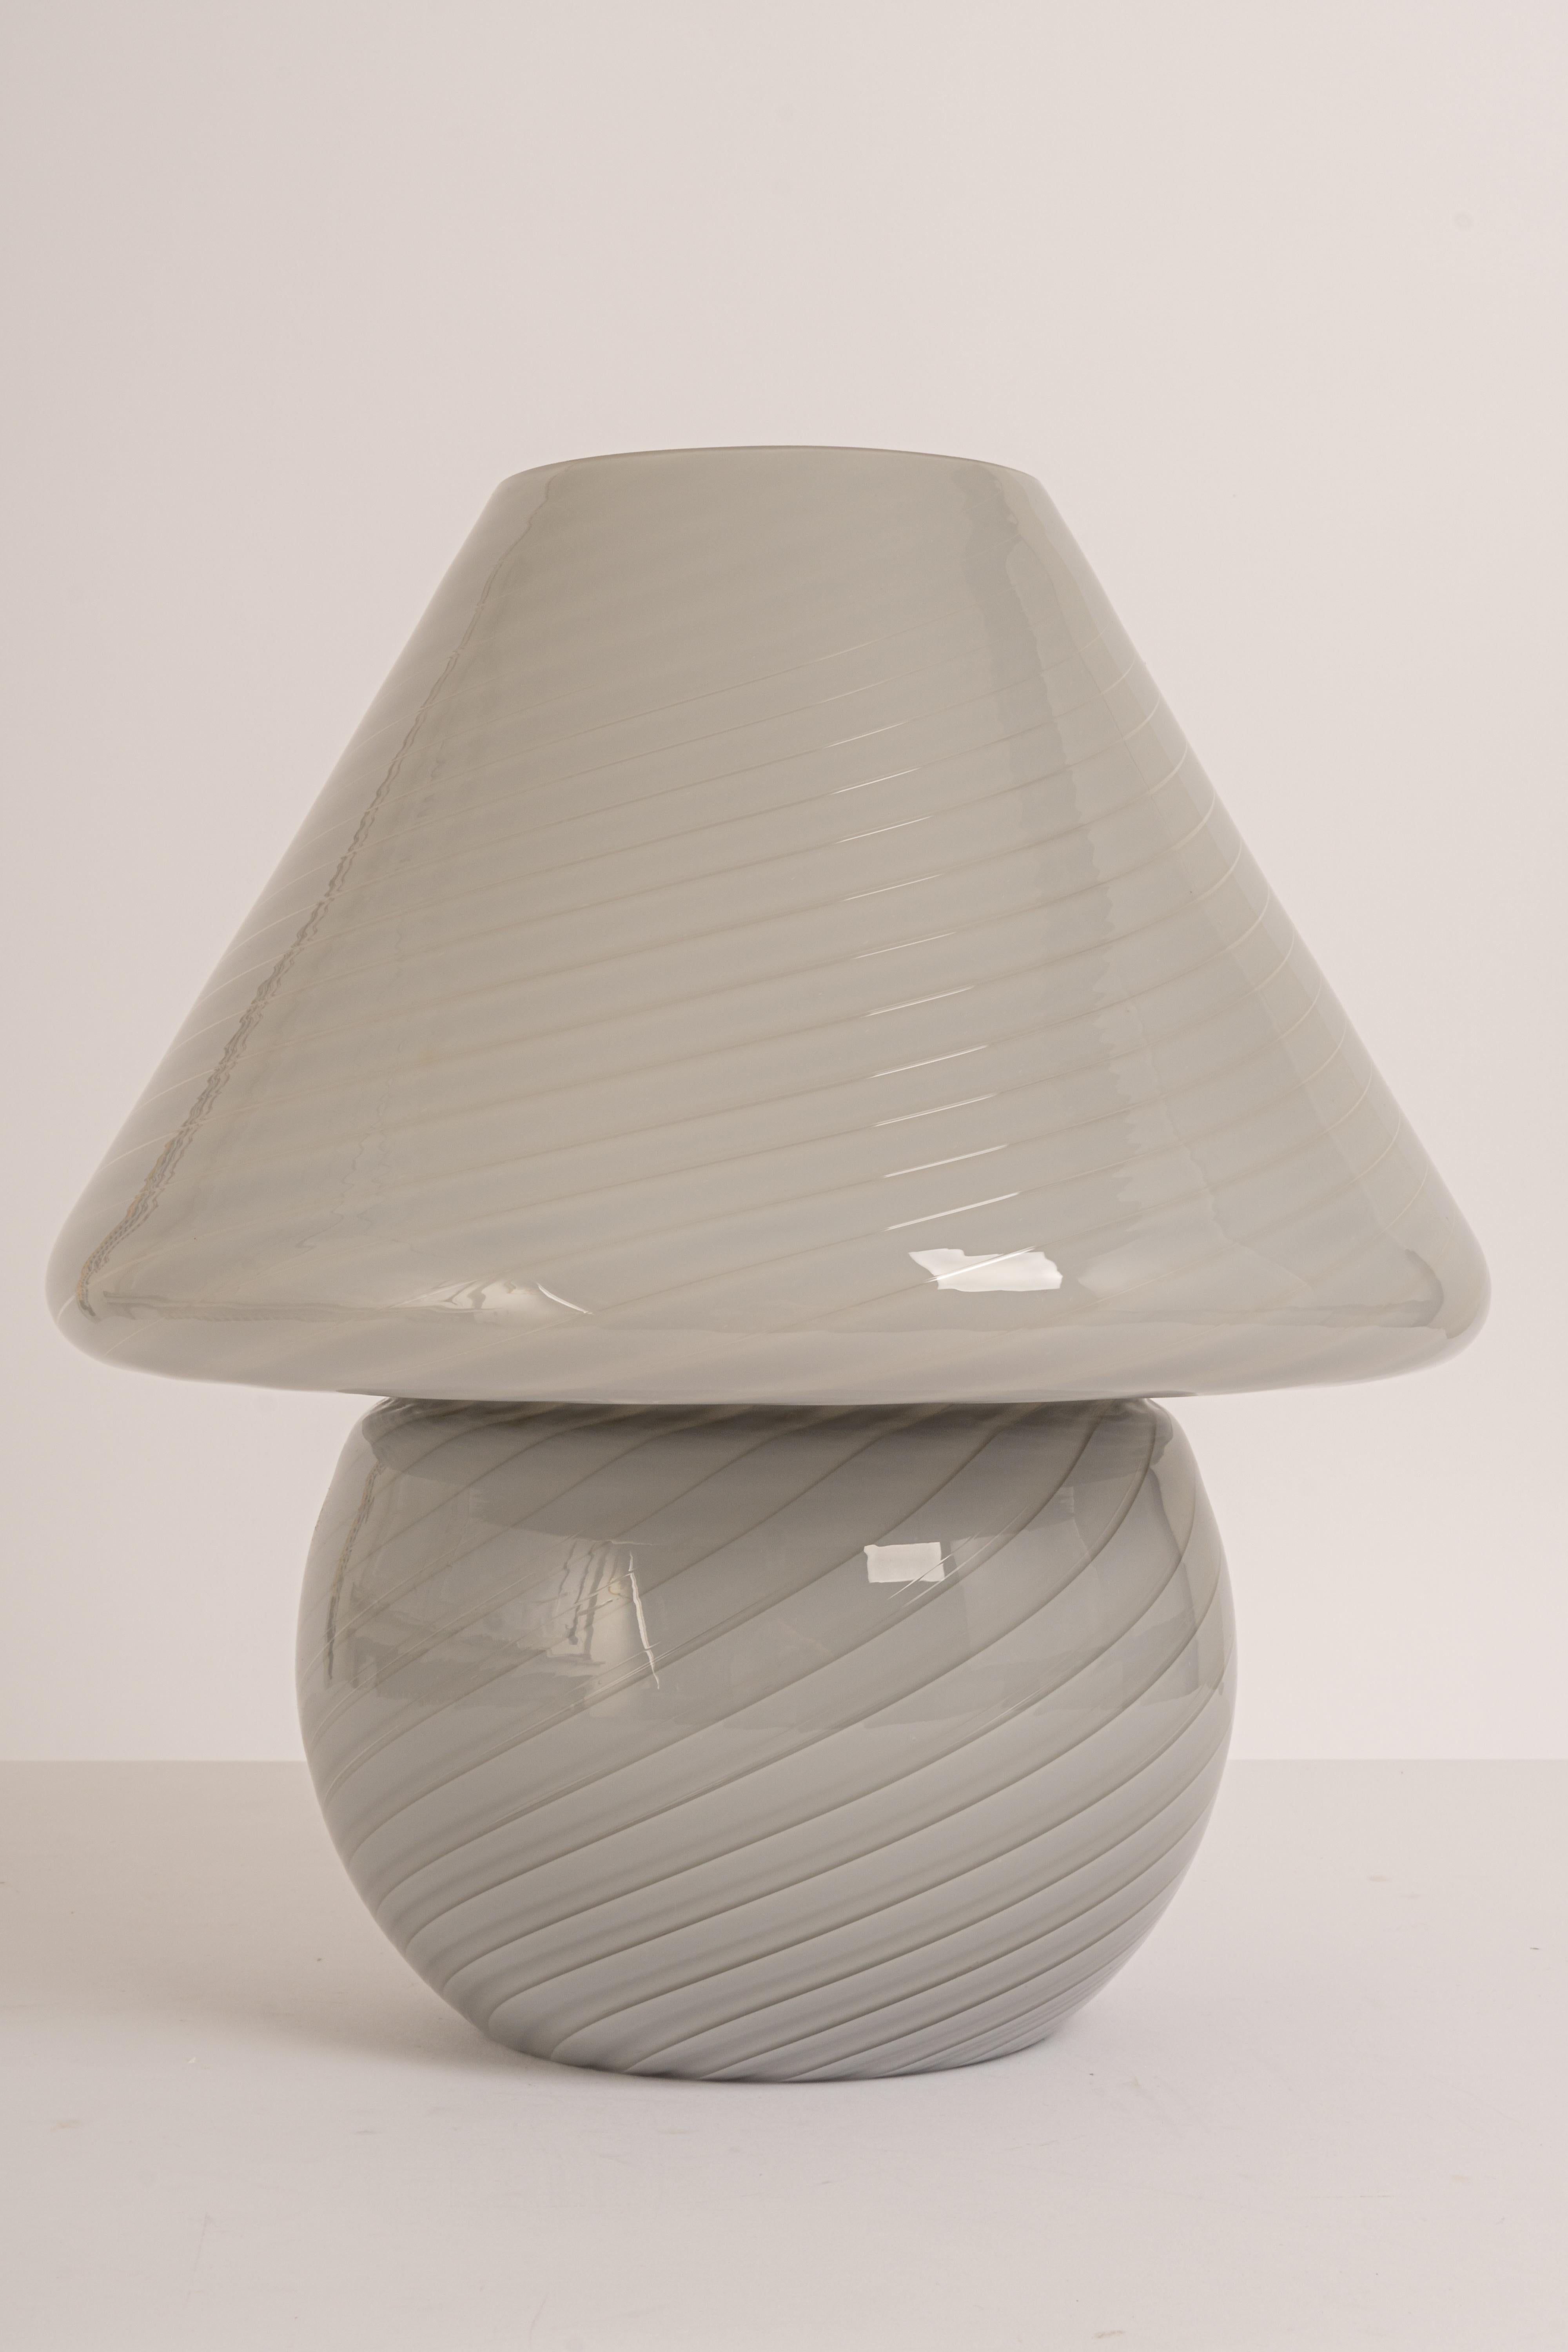 Wonderful mushroom table lamp by Peill & Putzler, Germany, 1970s. Made of a single piece.
Great glass body and its edgy quality contrast nicely with the smooth surface and shape of the mushroom. 

Measures: Large table lamp
Height 37 cm // 14.6